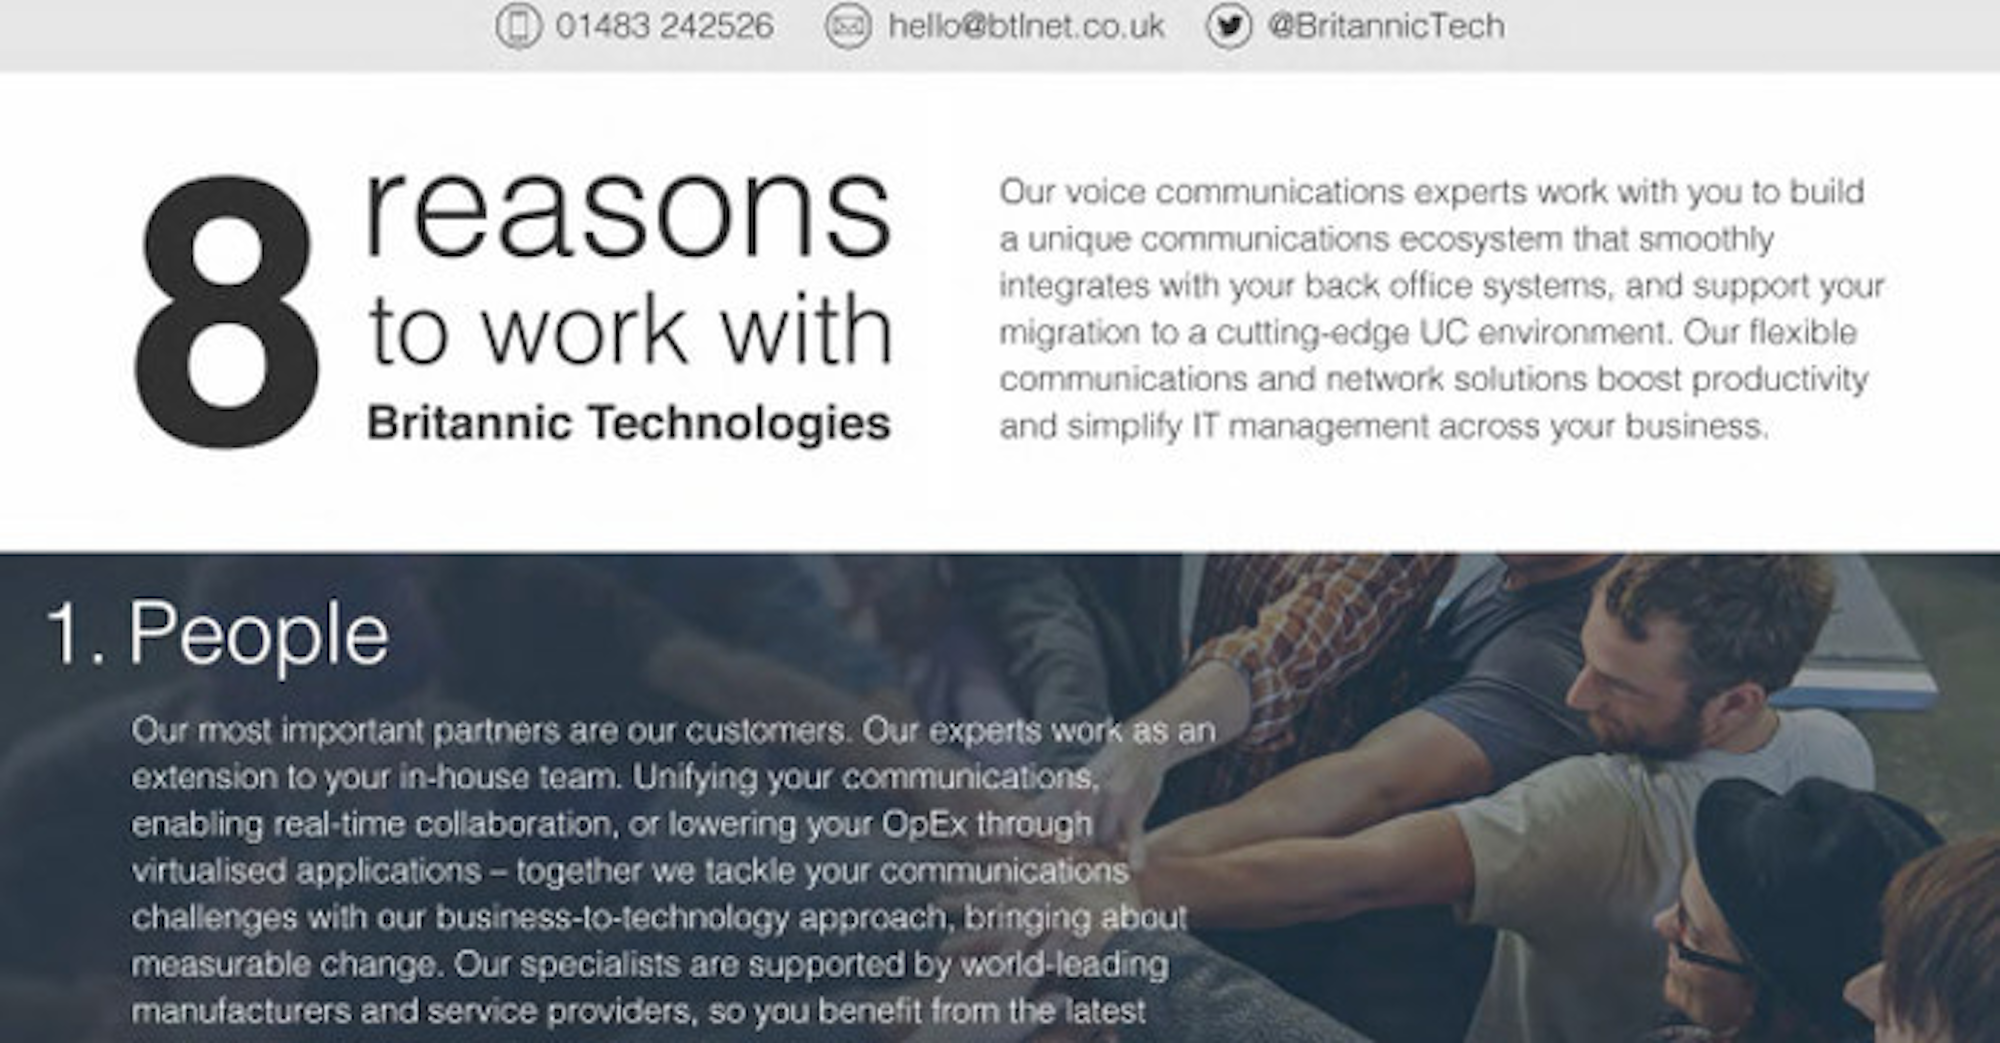 8 reasons to work with Britannic